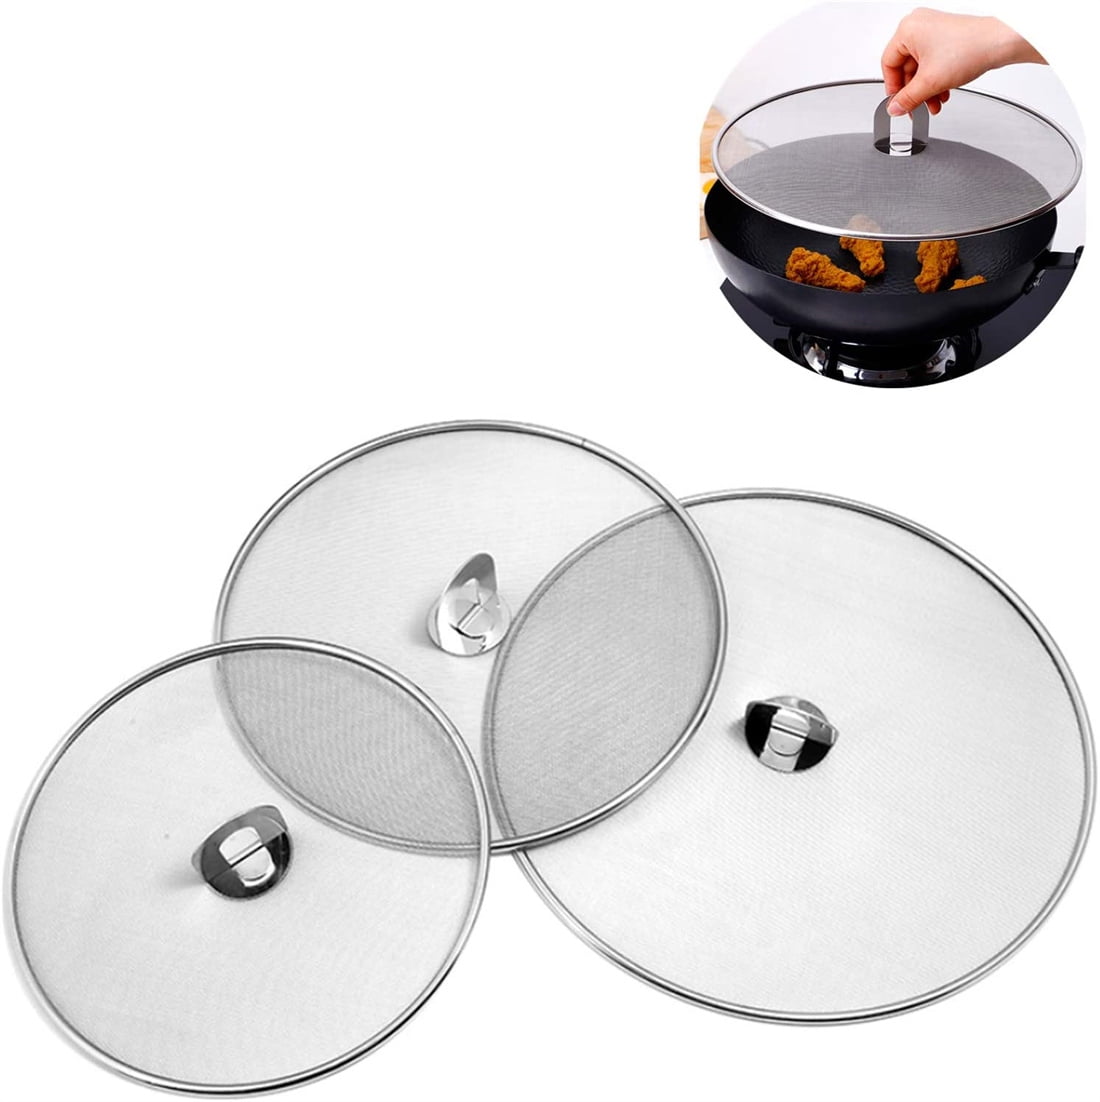 Kitchen Stuff for New Home Frying Pan Splash Guard Fine Mesh Cover Strainer  Grease Guard With Handle Kitchen Sink Strainer 3 - AliExpress